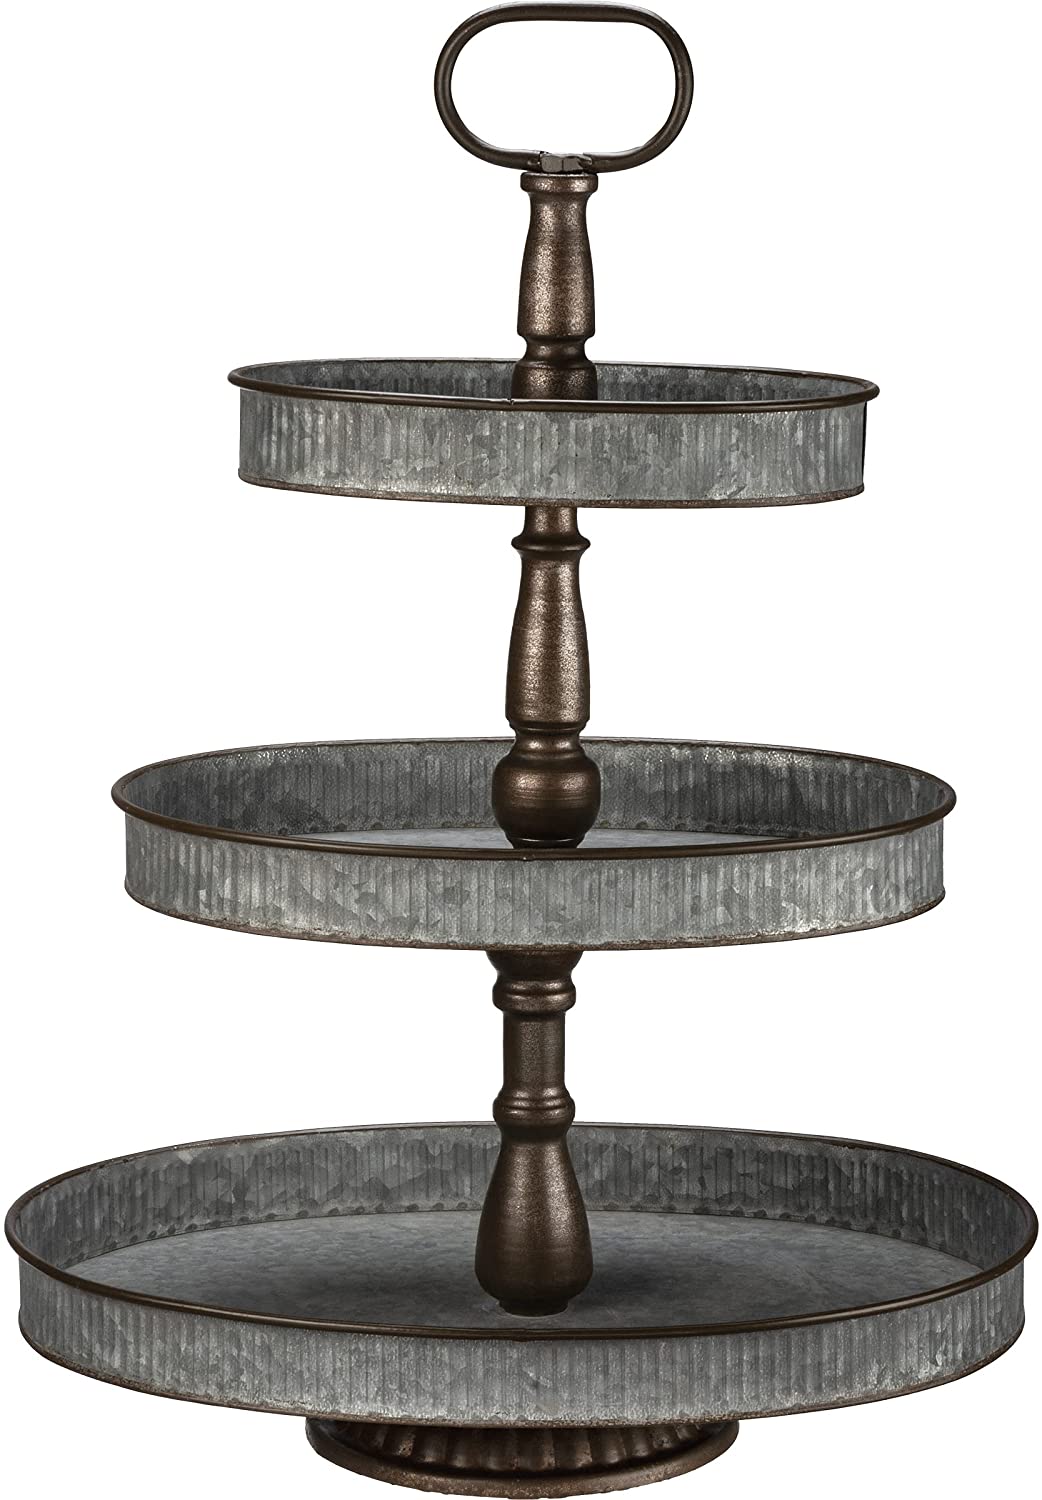 Tray- Metal 3 Tier Oval